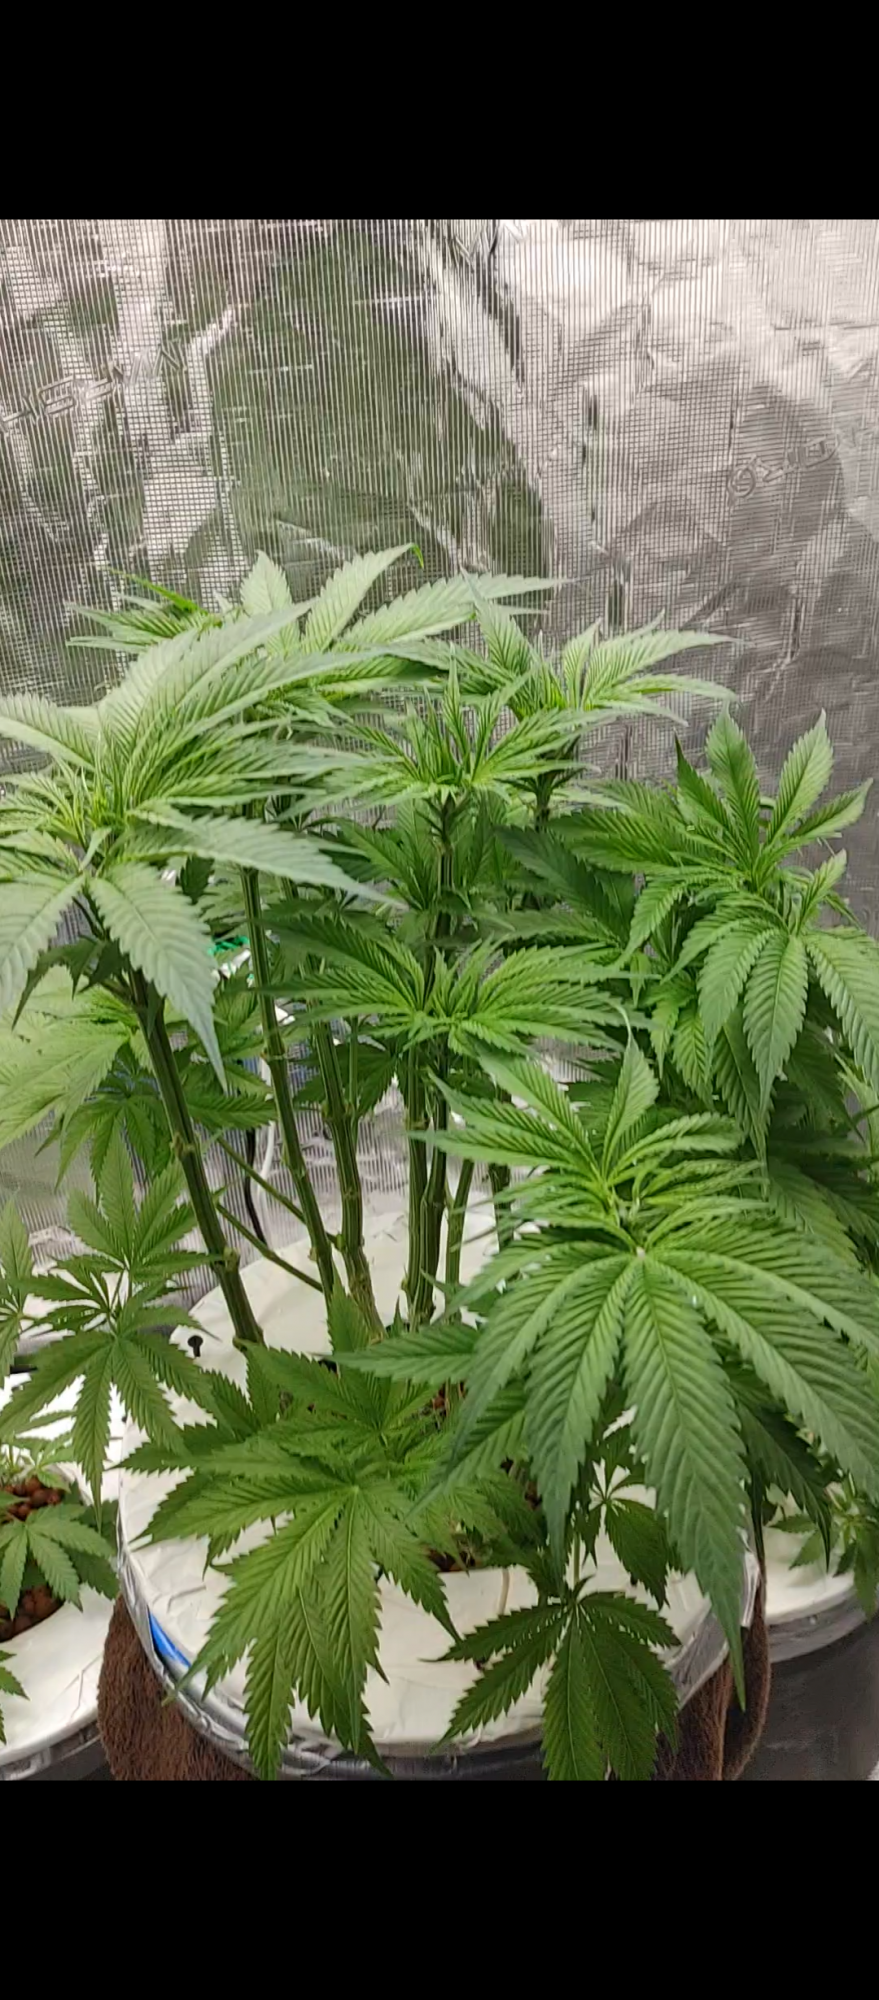 Whats your thoughts on my grow 3